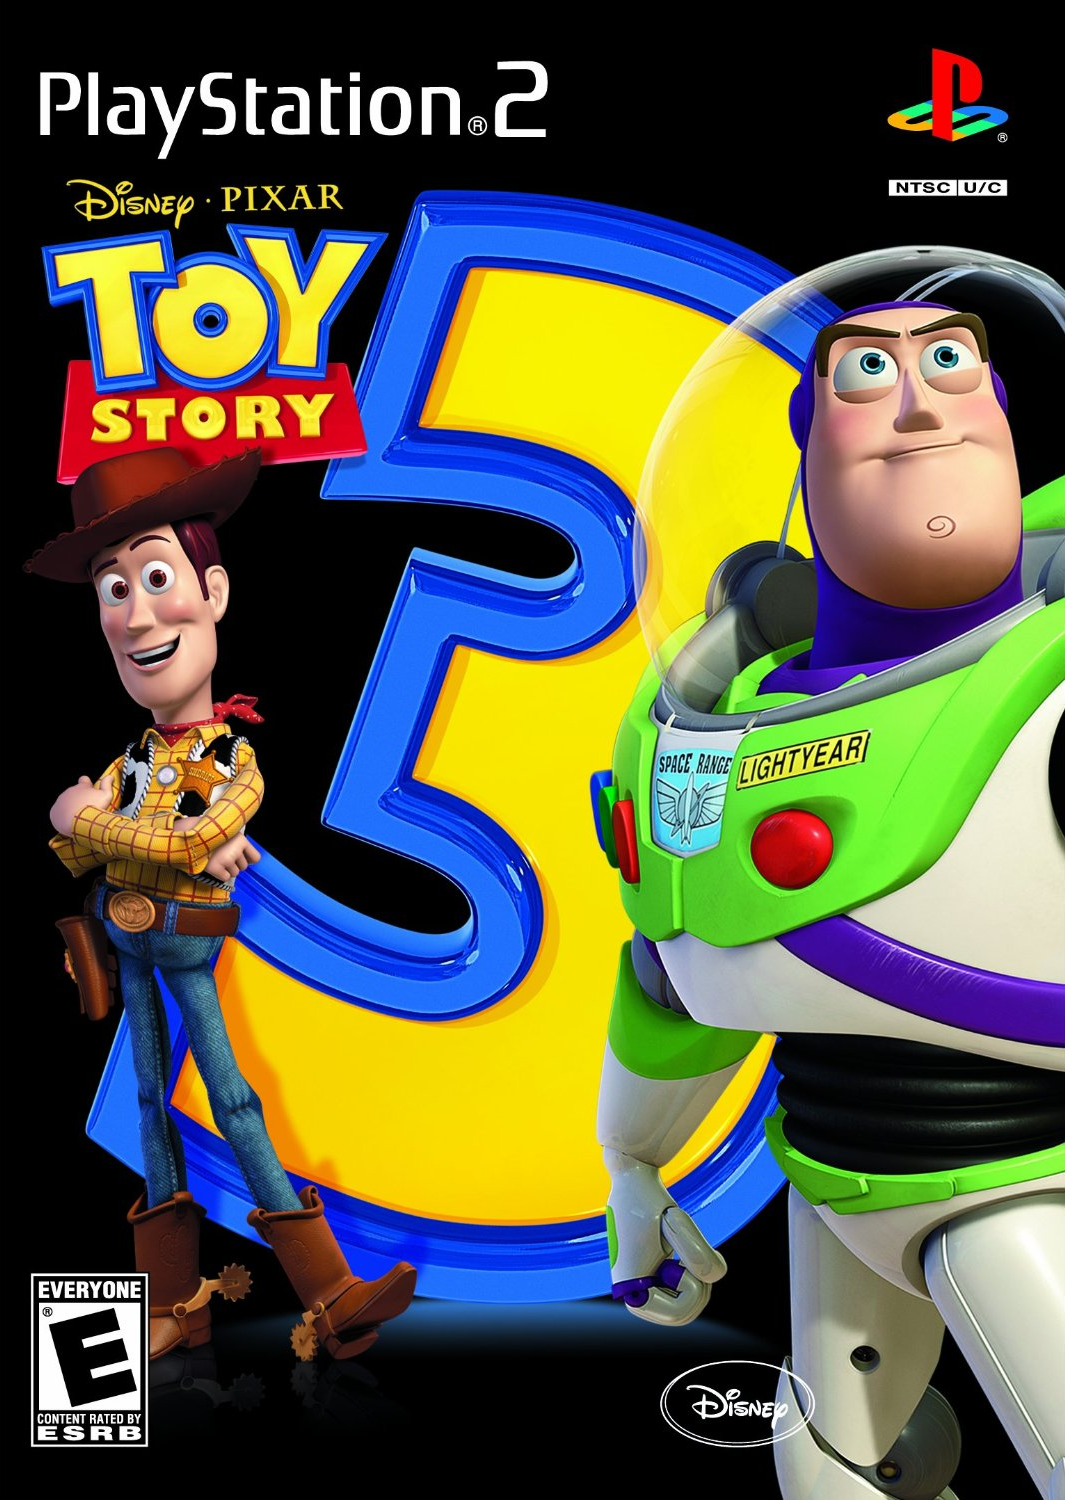 download toystory2dvd